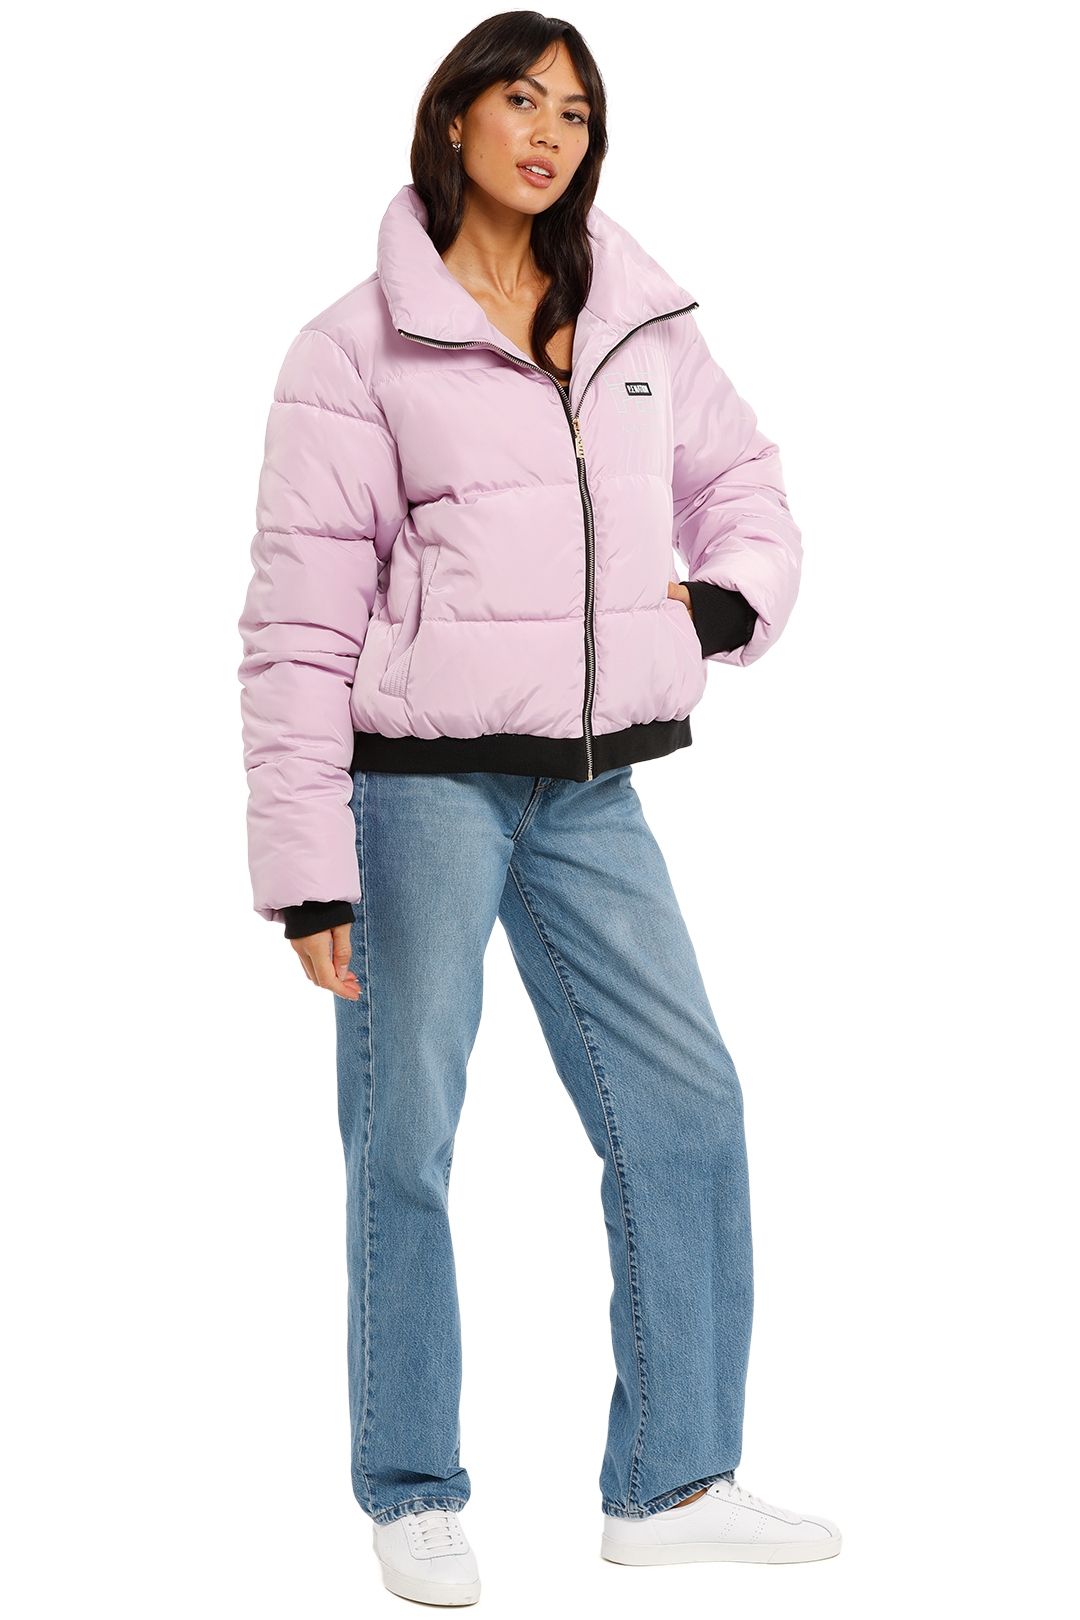 Hire Ramp Run Puffer Jacket in Orchid Bouquet | PE Nation | GlamCorner